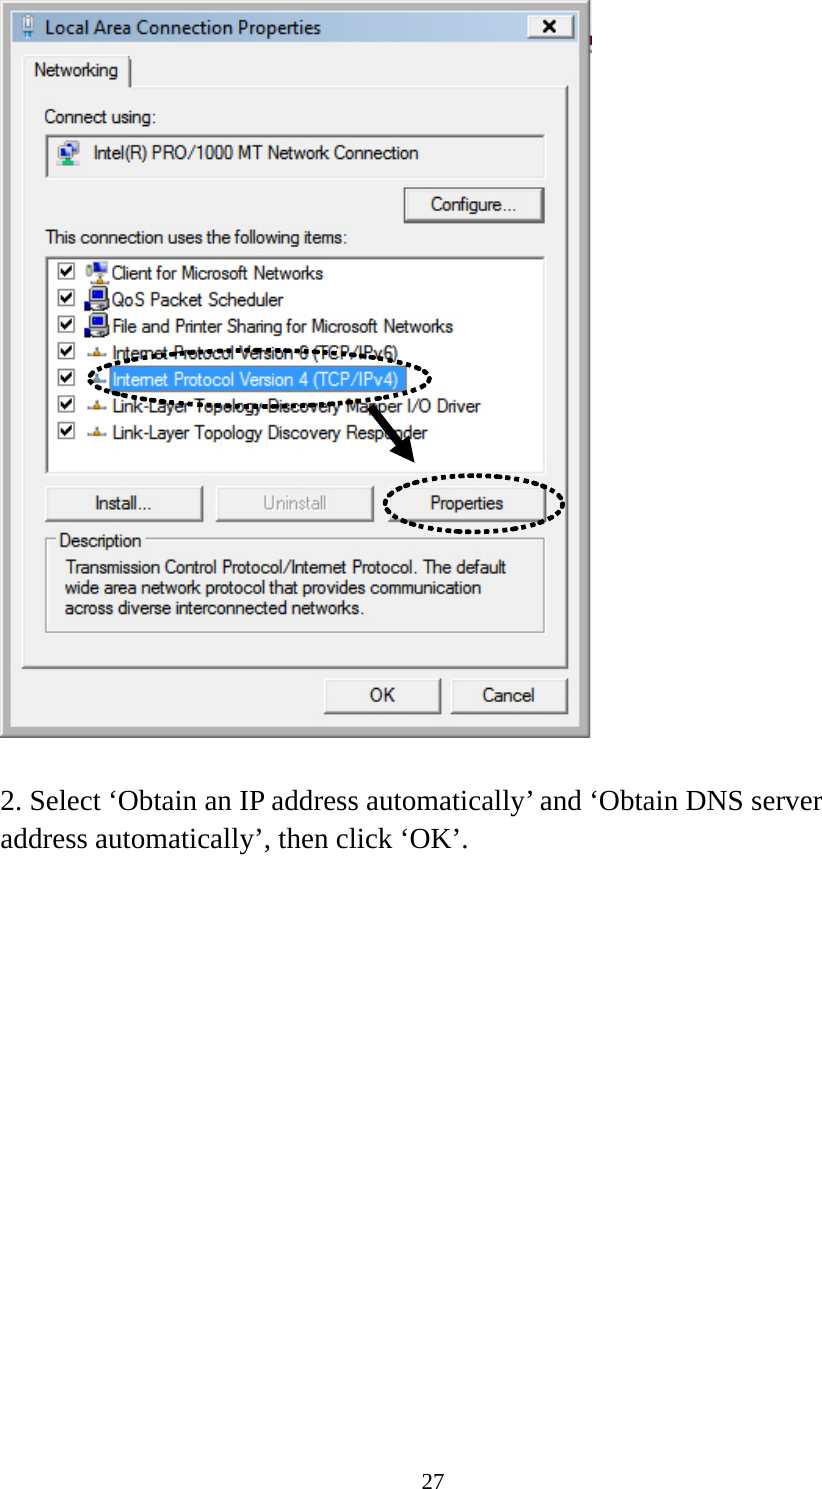 27   2. Select ‘Obtain an IP address automatically’ and ‘Obtain DNS server address automatically’, then click ‘OK’.  